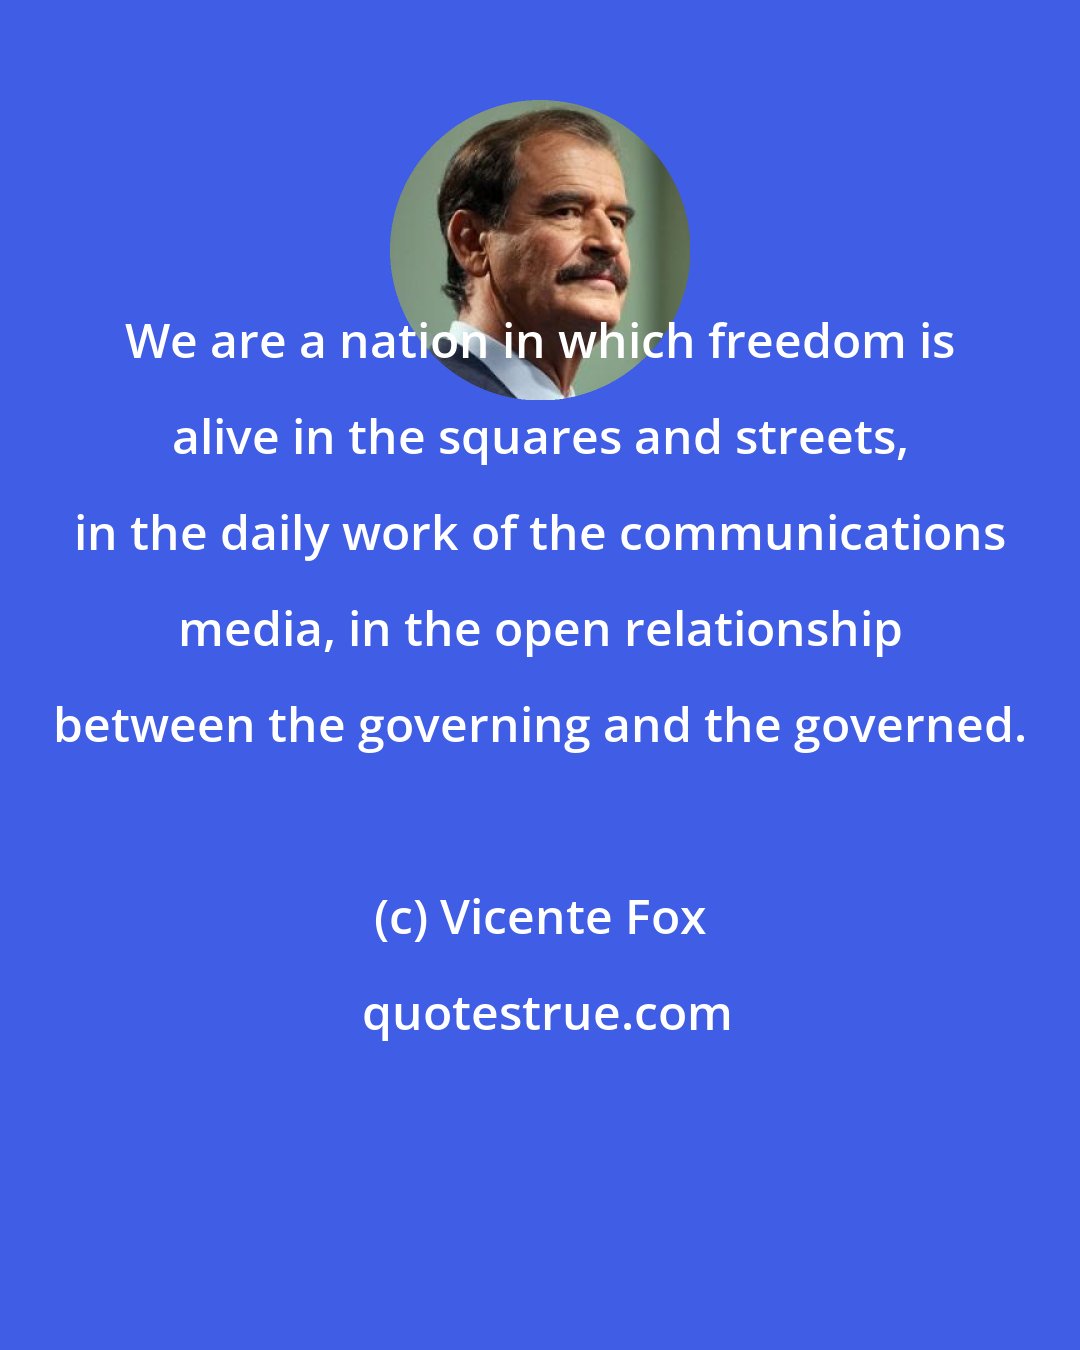 Vicente Fox: We are a nation in which freedom is alive in the squares and streets, in the daily work of the communications media, in the open relationship between the governing and the governed.